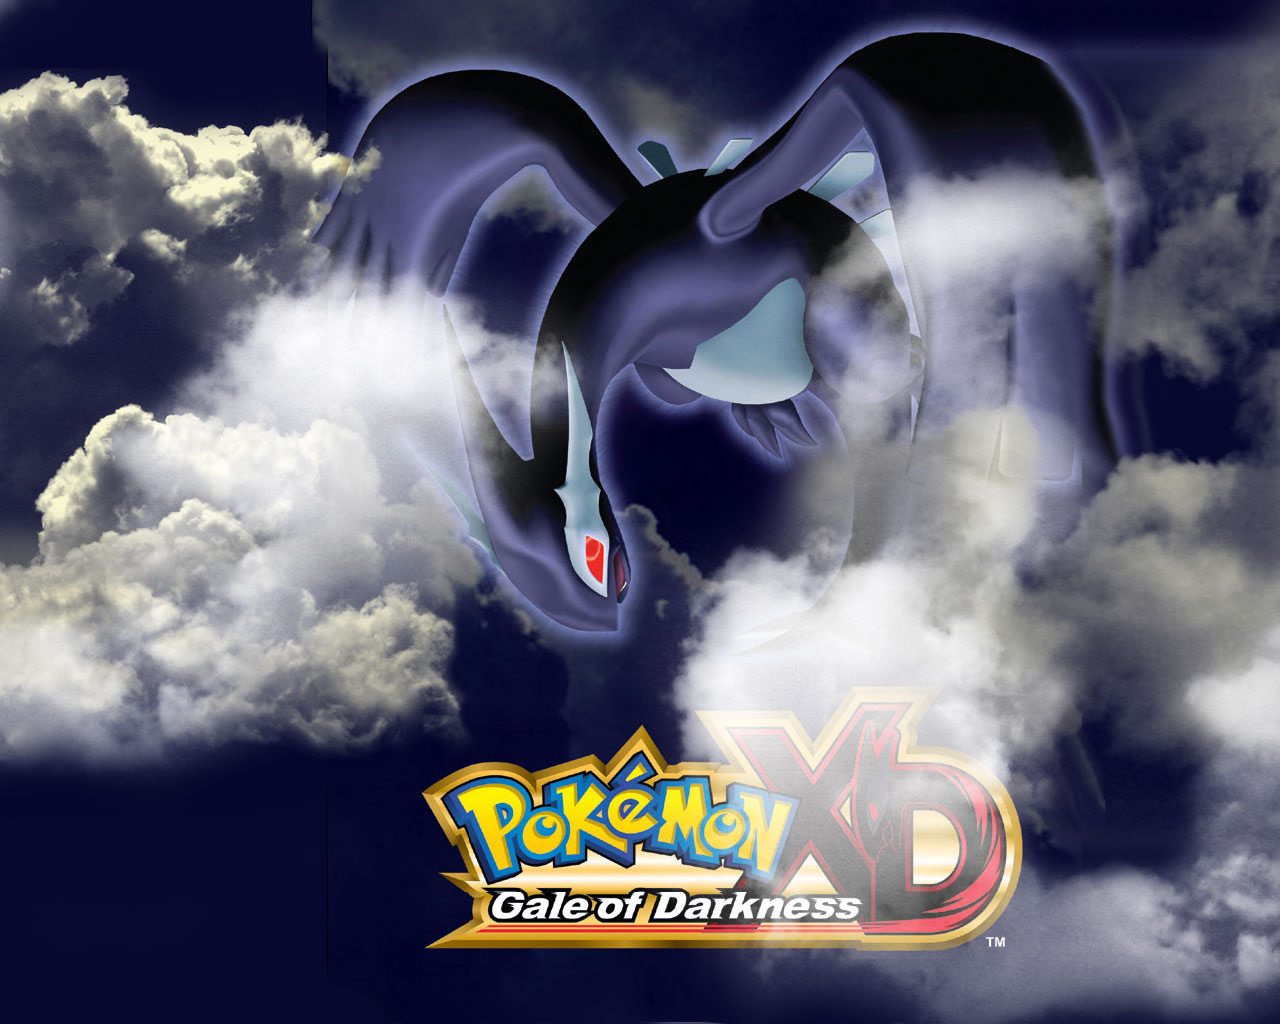 http://www.emuparadise.me/fup/up/66289-Pokemon_XD_Gale_of_Darkness-1.jpg